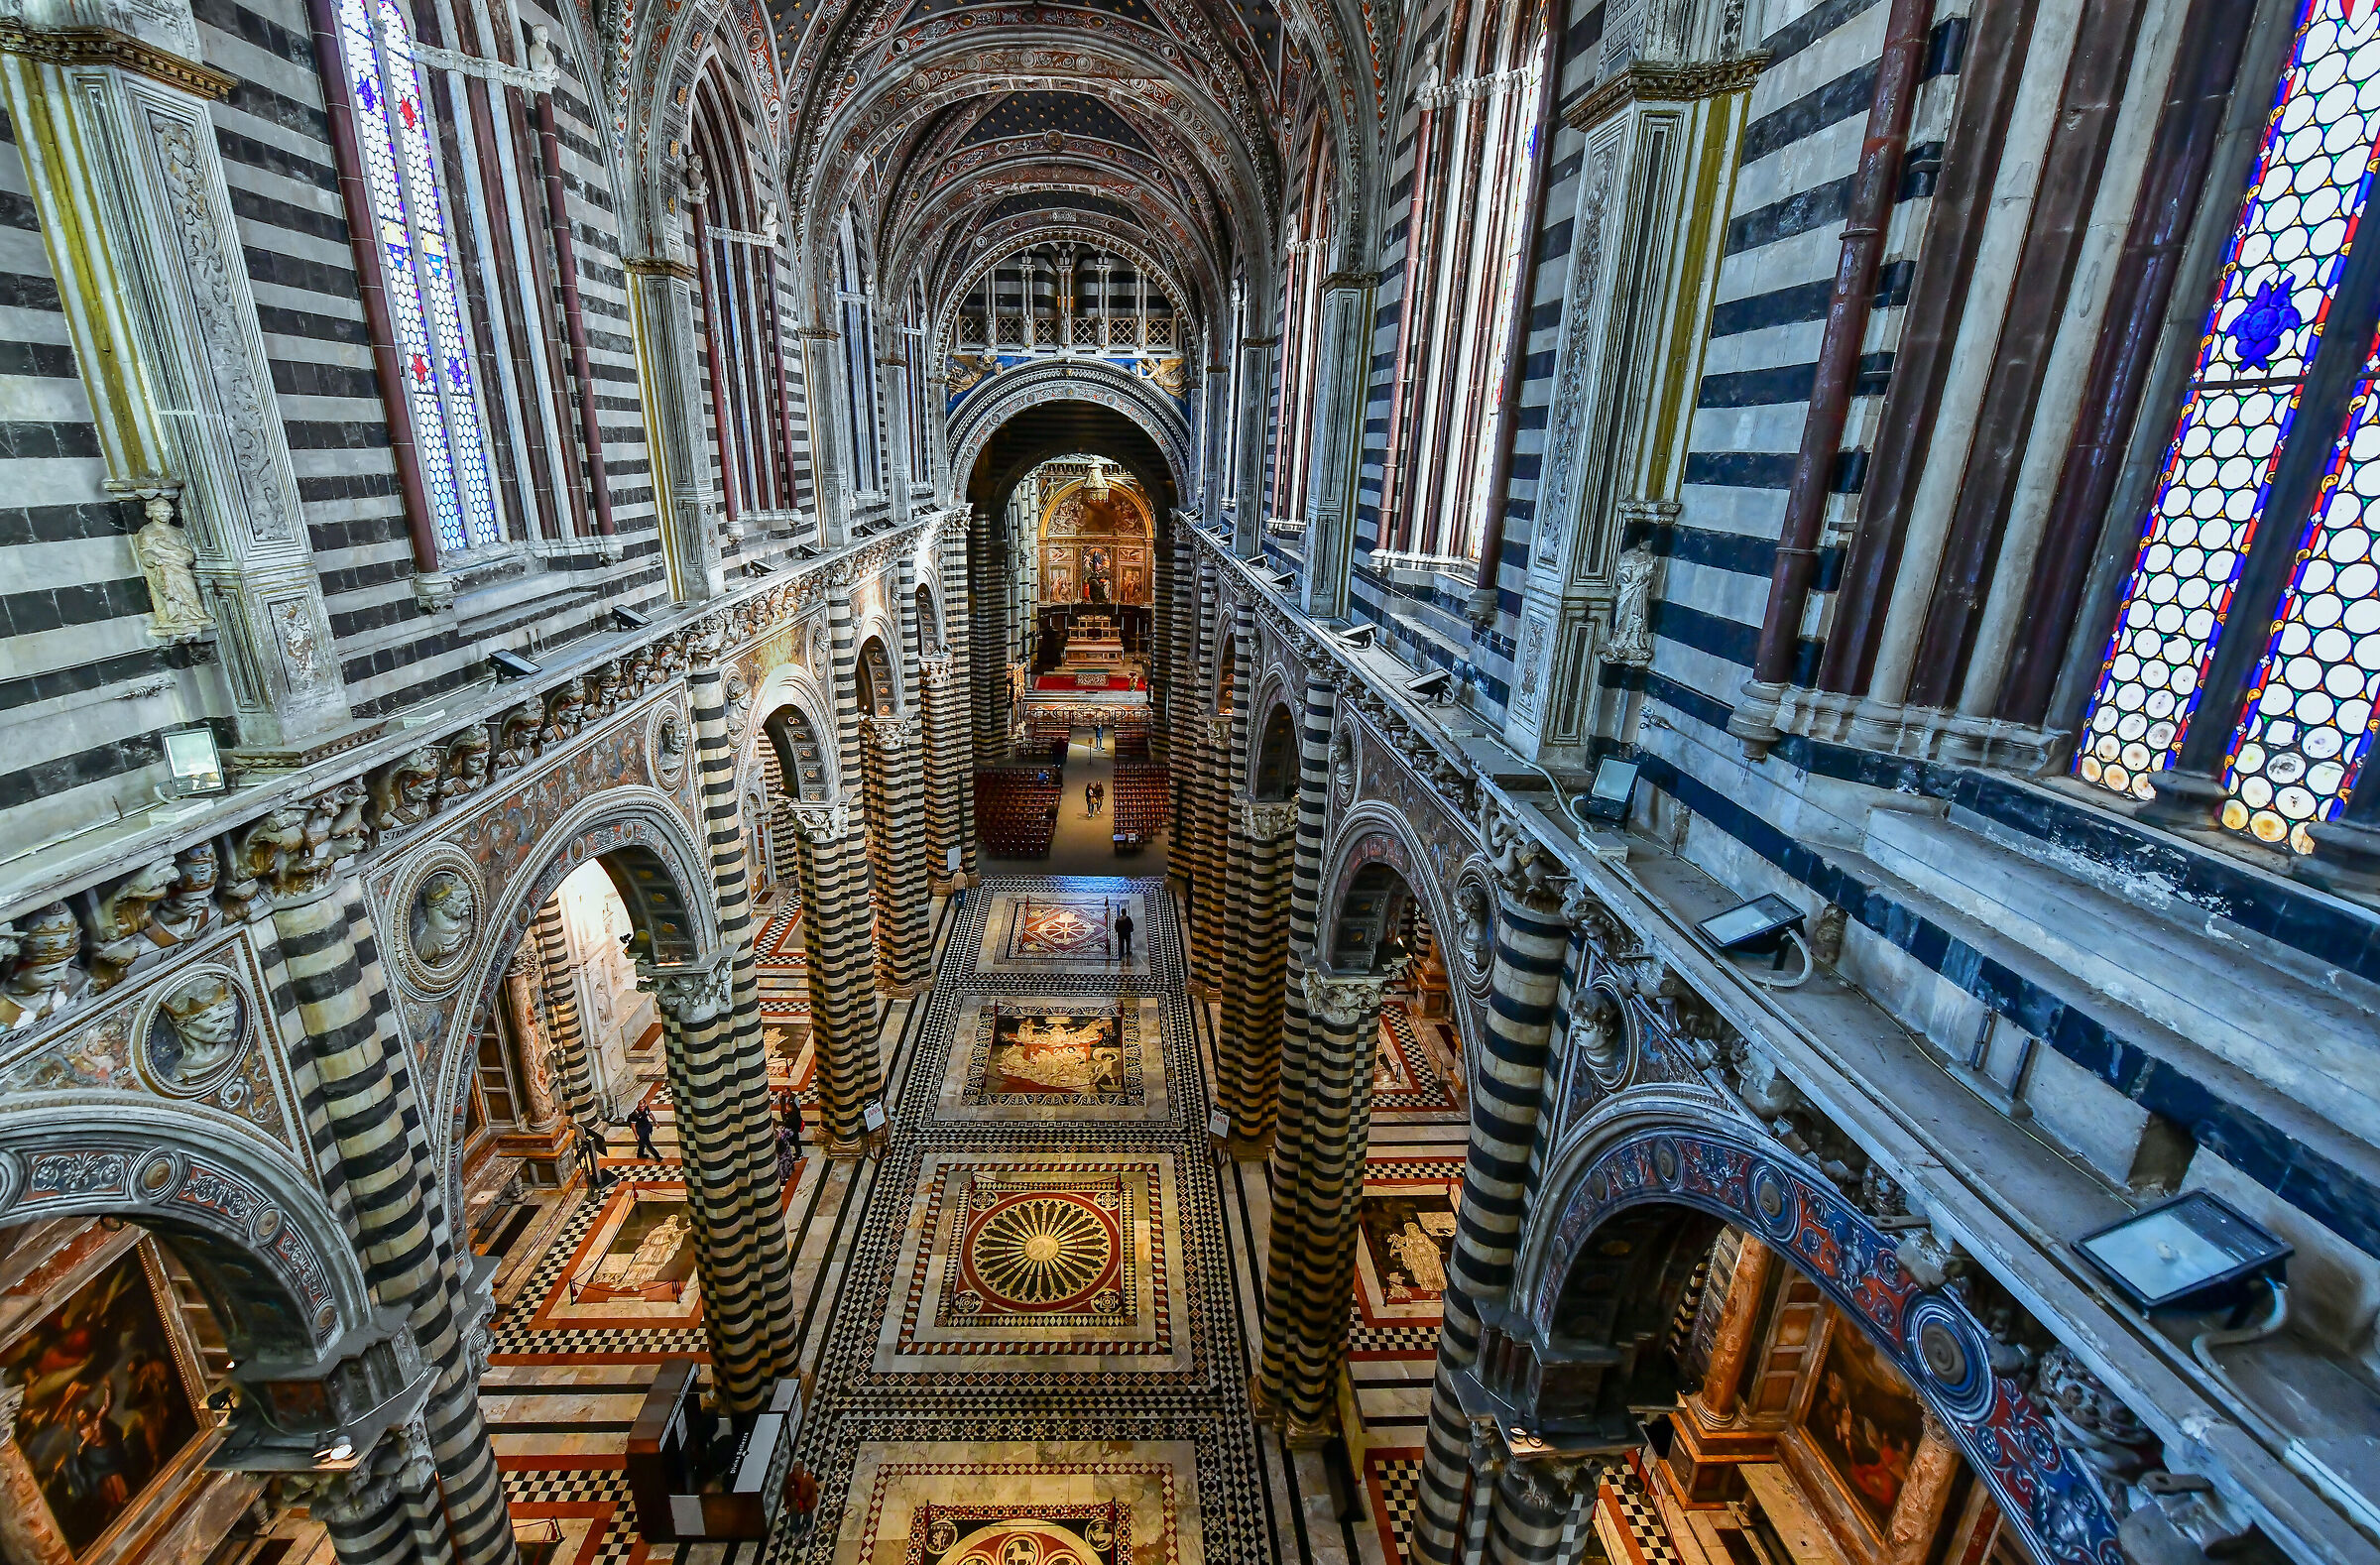 Duomo di Siena-View from the "Gates of Heaven"...